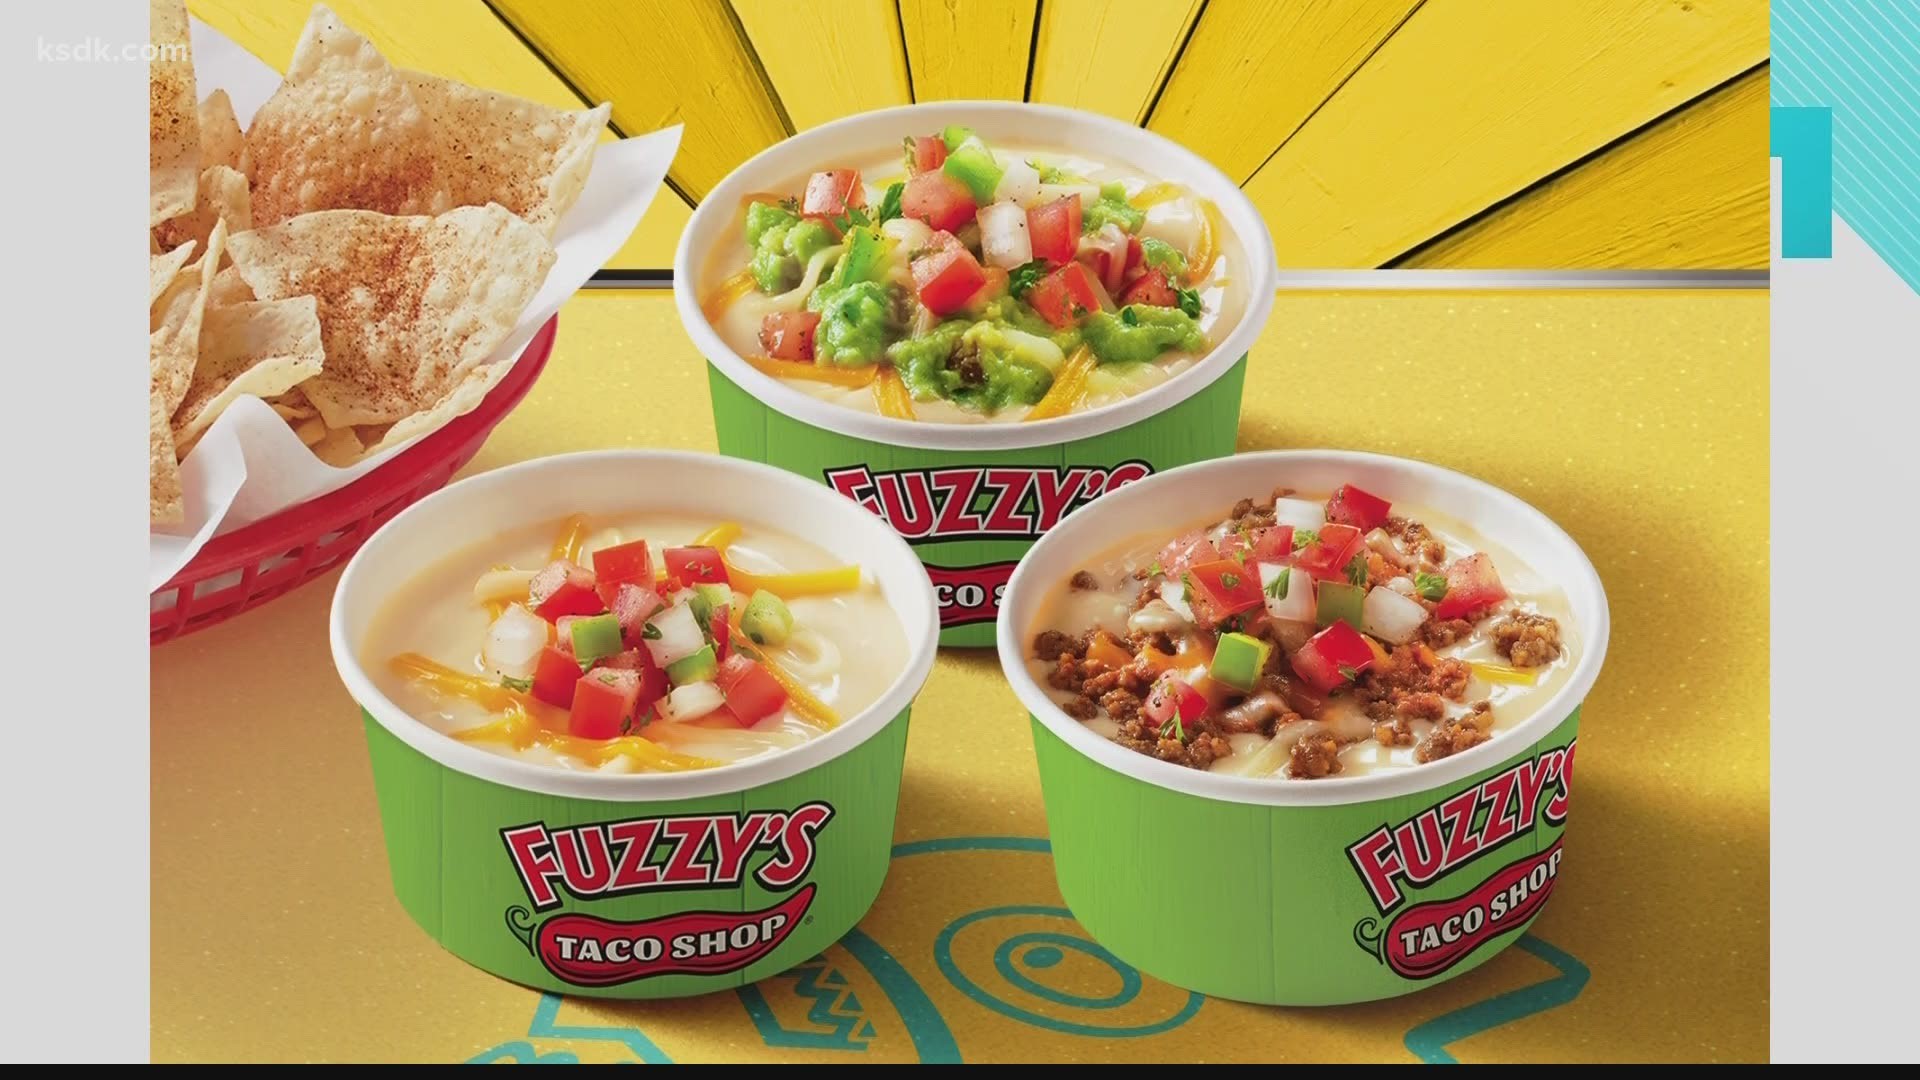 Fuzzy’s Summer Fridays go through August 21, 2020. Names will be drawn each Friday for the giveaway. For more information, visit fuzzystacoshop.com.